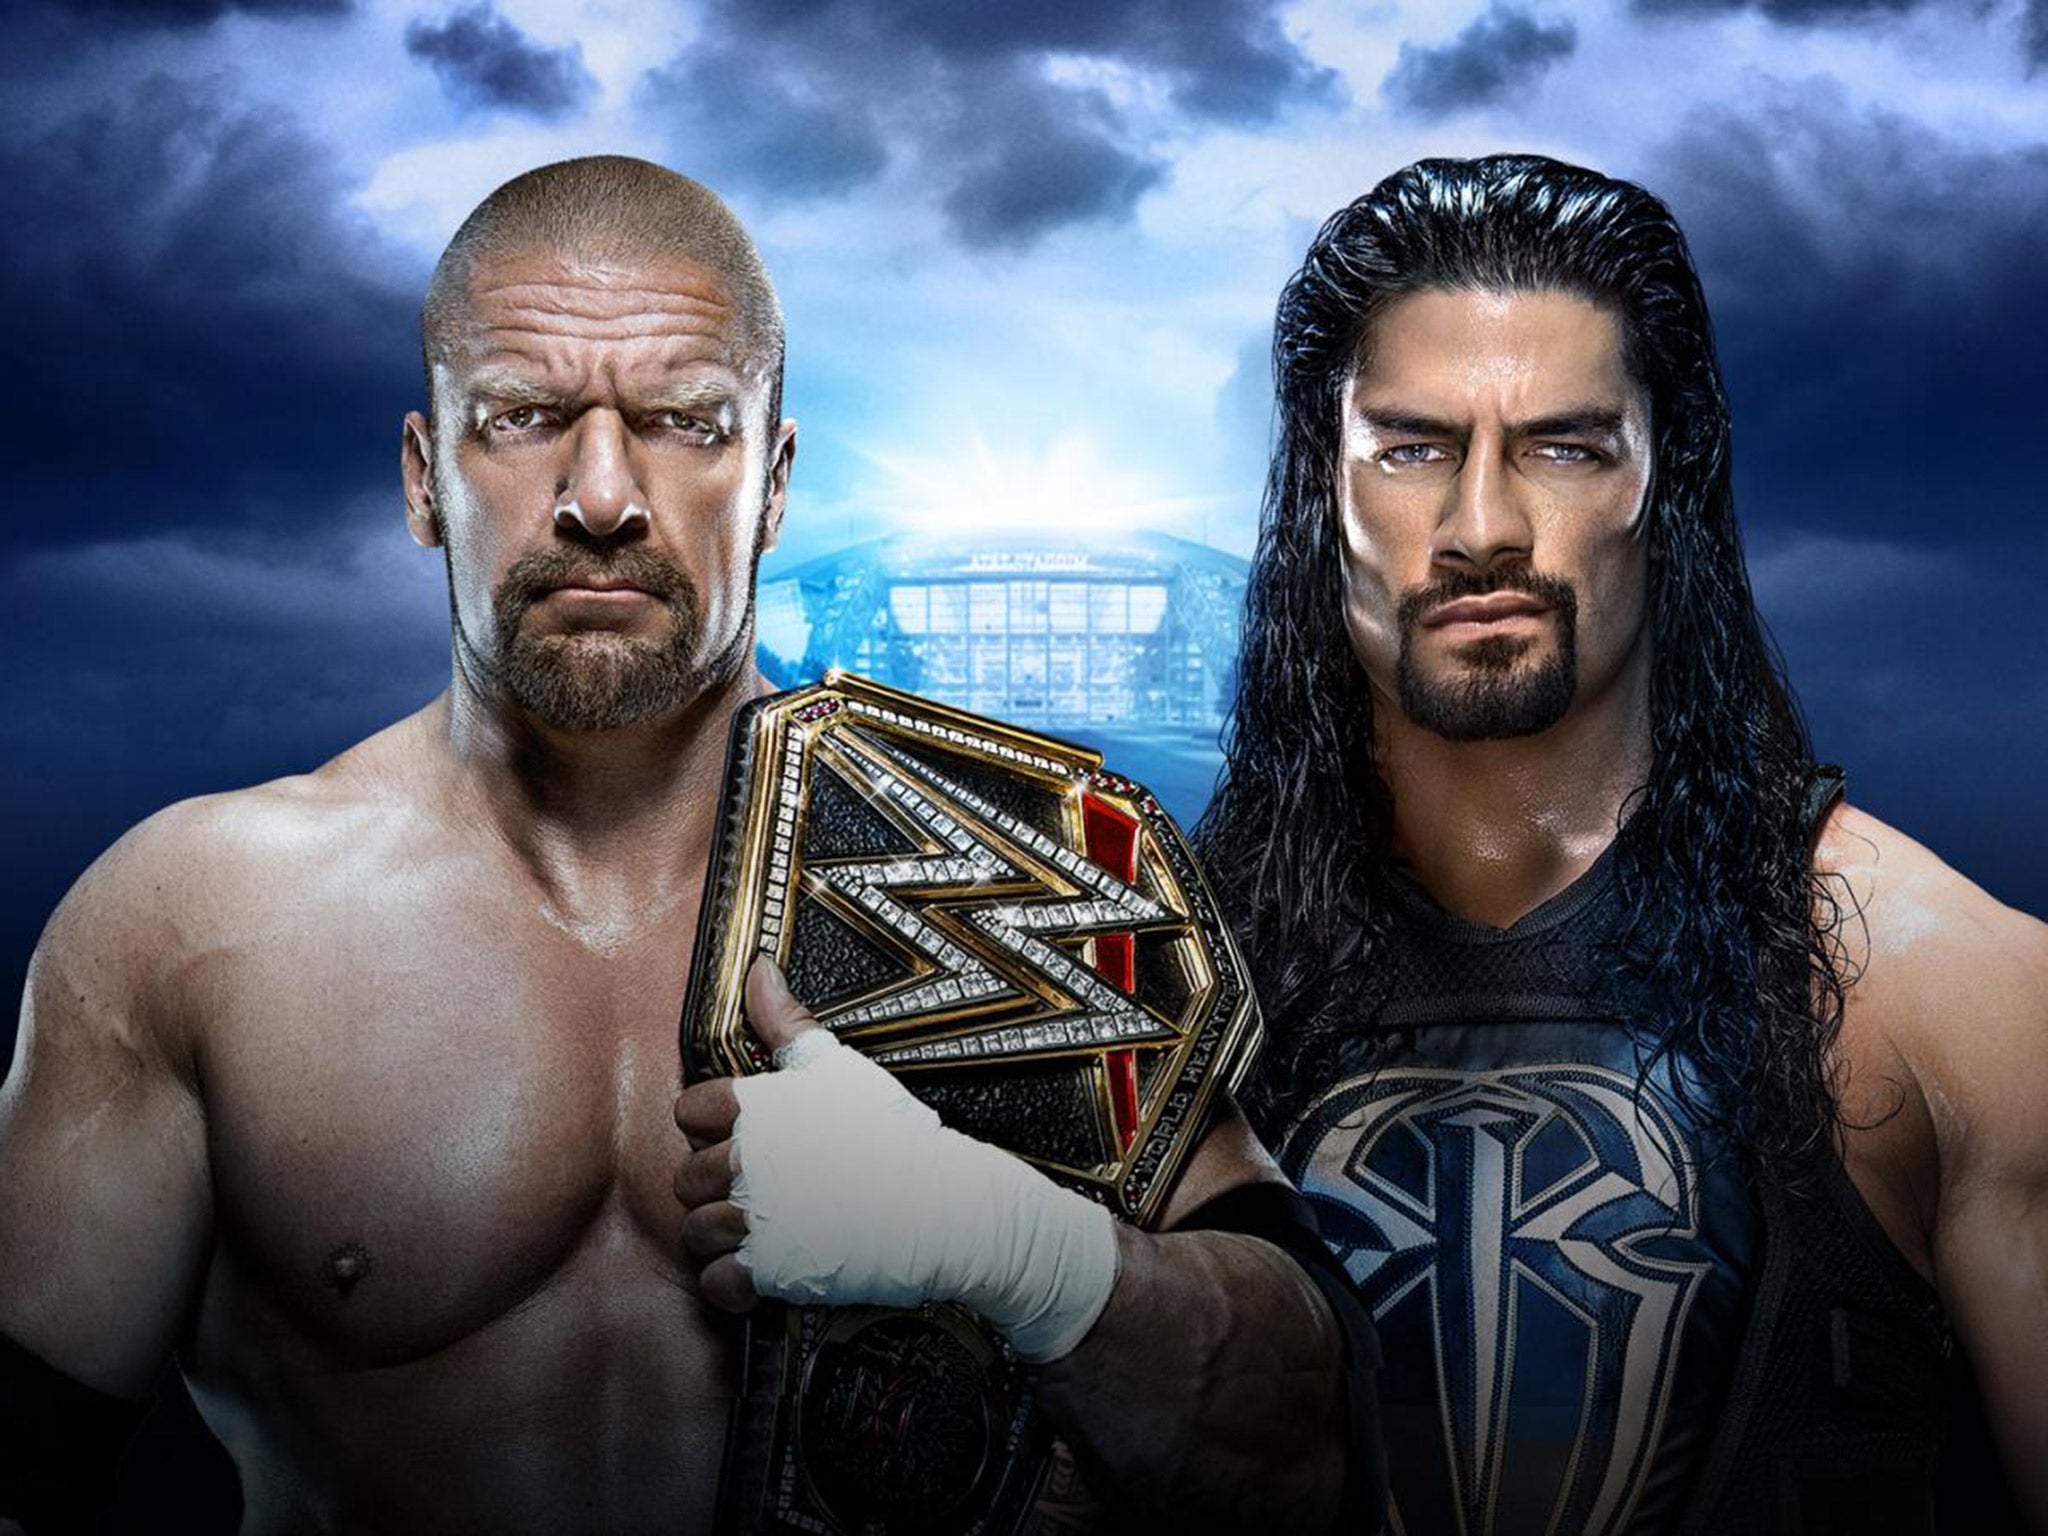 Triple H will face Roman Reigns at WrestleMania 32